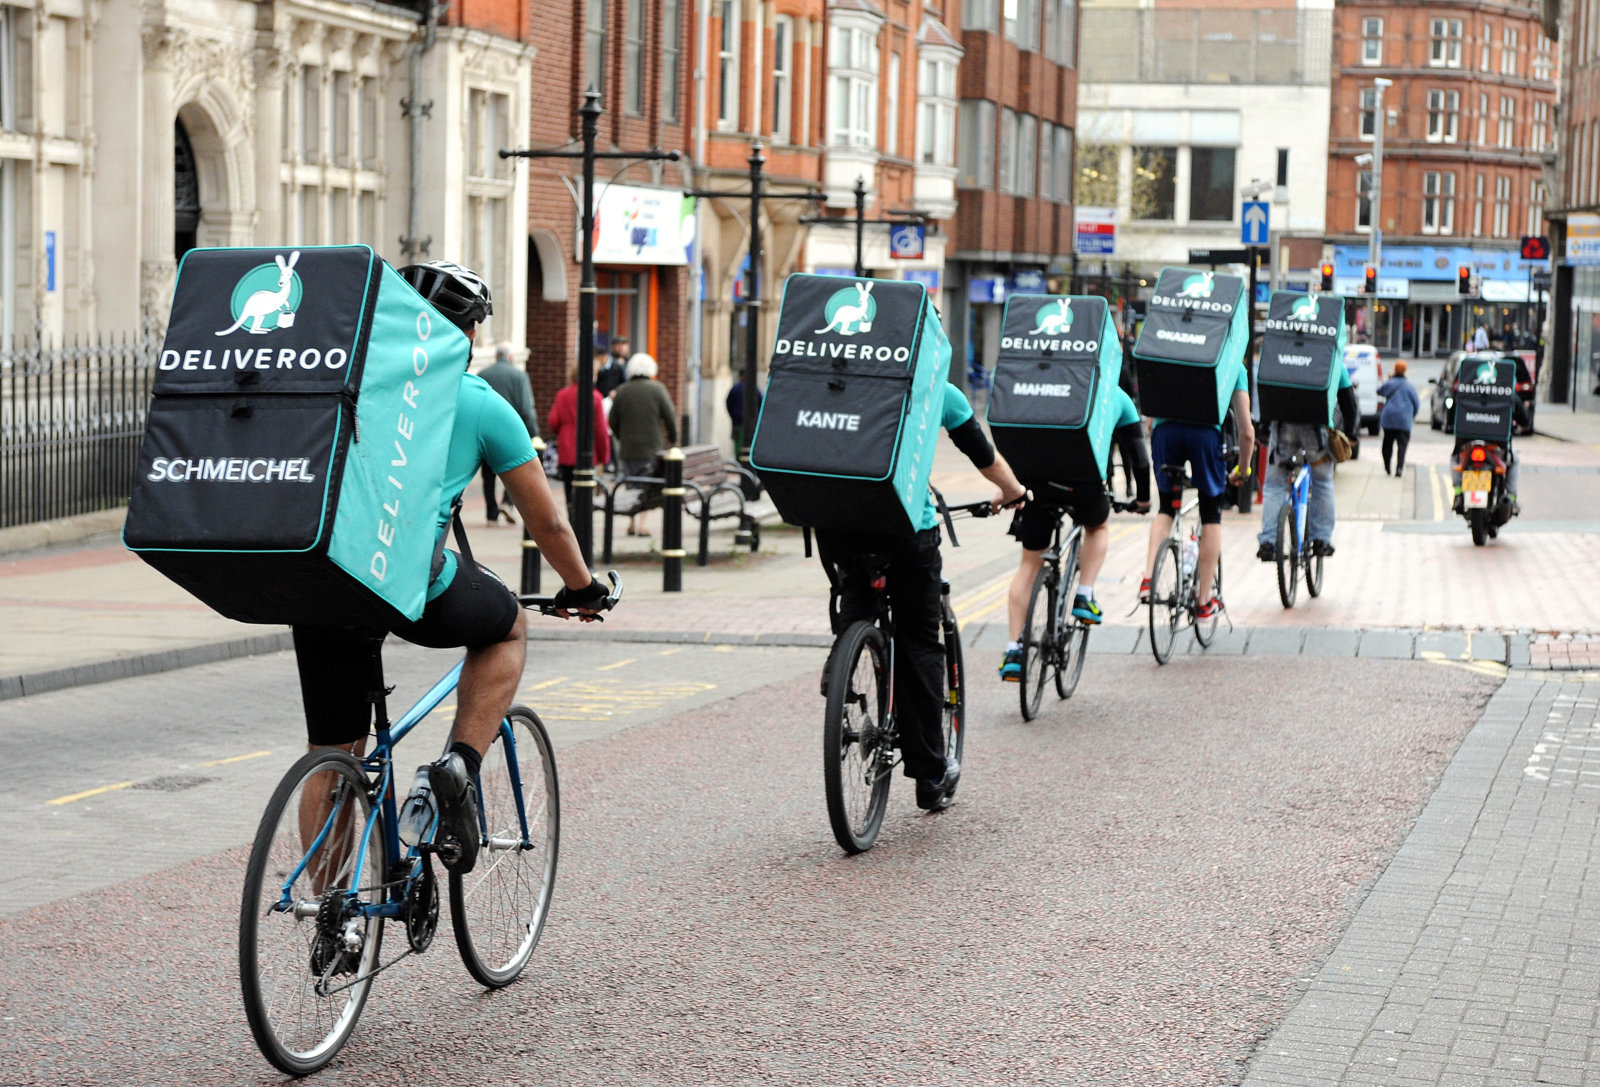 Amazon-backed by Deliveroo slashes IPO target range once the investor recoil